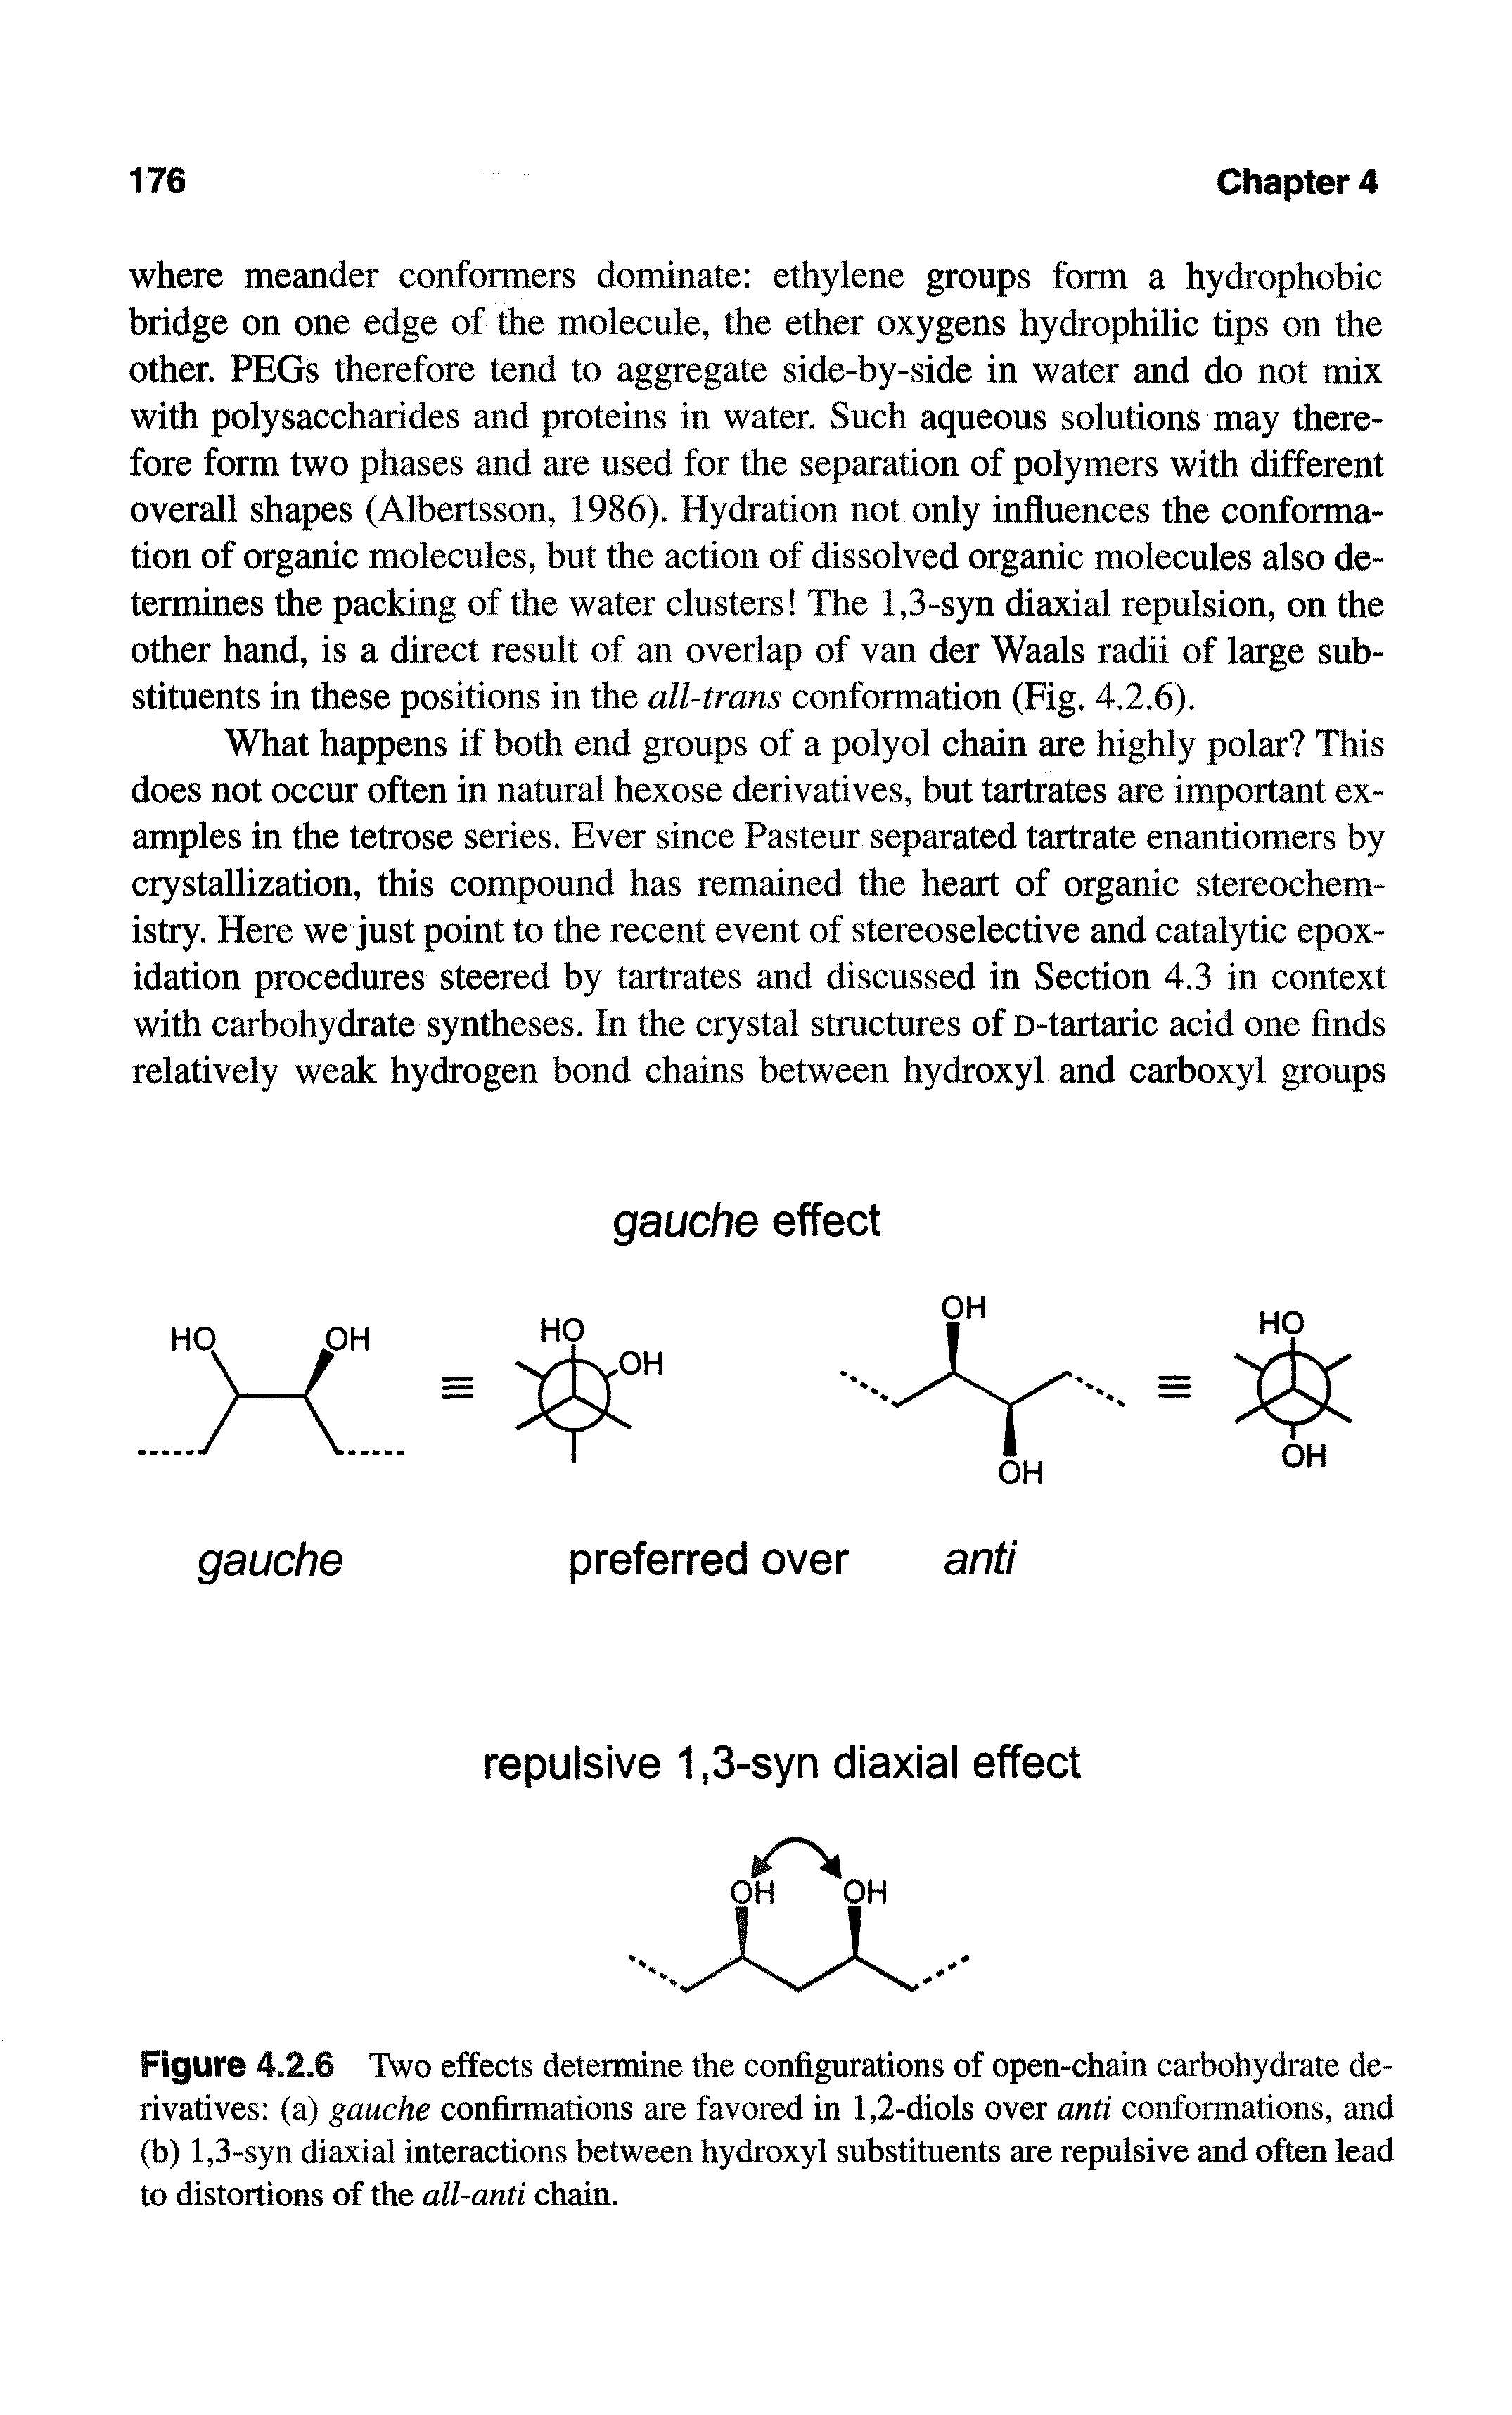 Figure 4.2.6 Two effects determine the configurations of open-chain carbohydrate derivatives (a) gauche confirmations are favored in 1,2-diols over anti conformations, and (b) 1,3-syn diaxial interactions between hydroxyl substituents are repulsive and often lead to distortions of the all-anti chain.